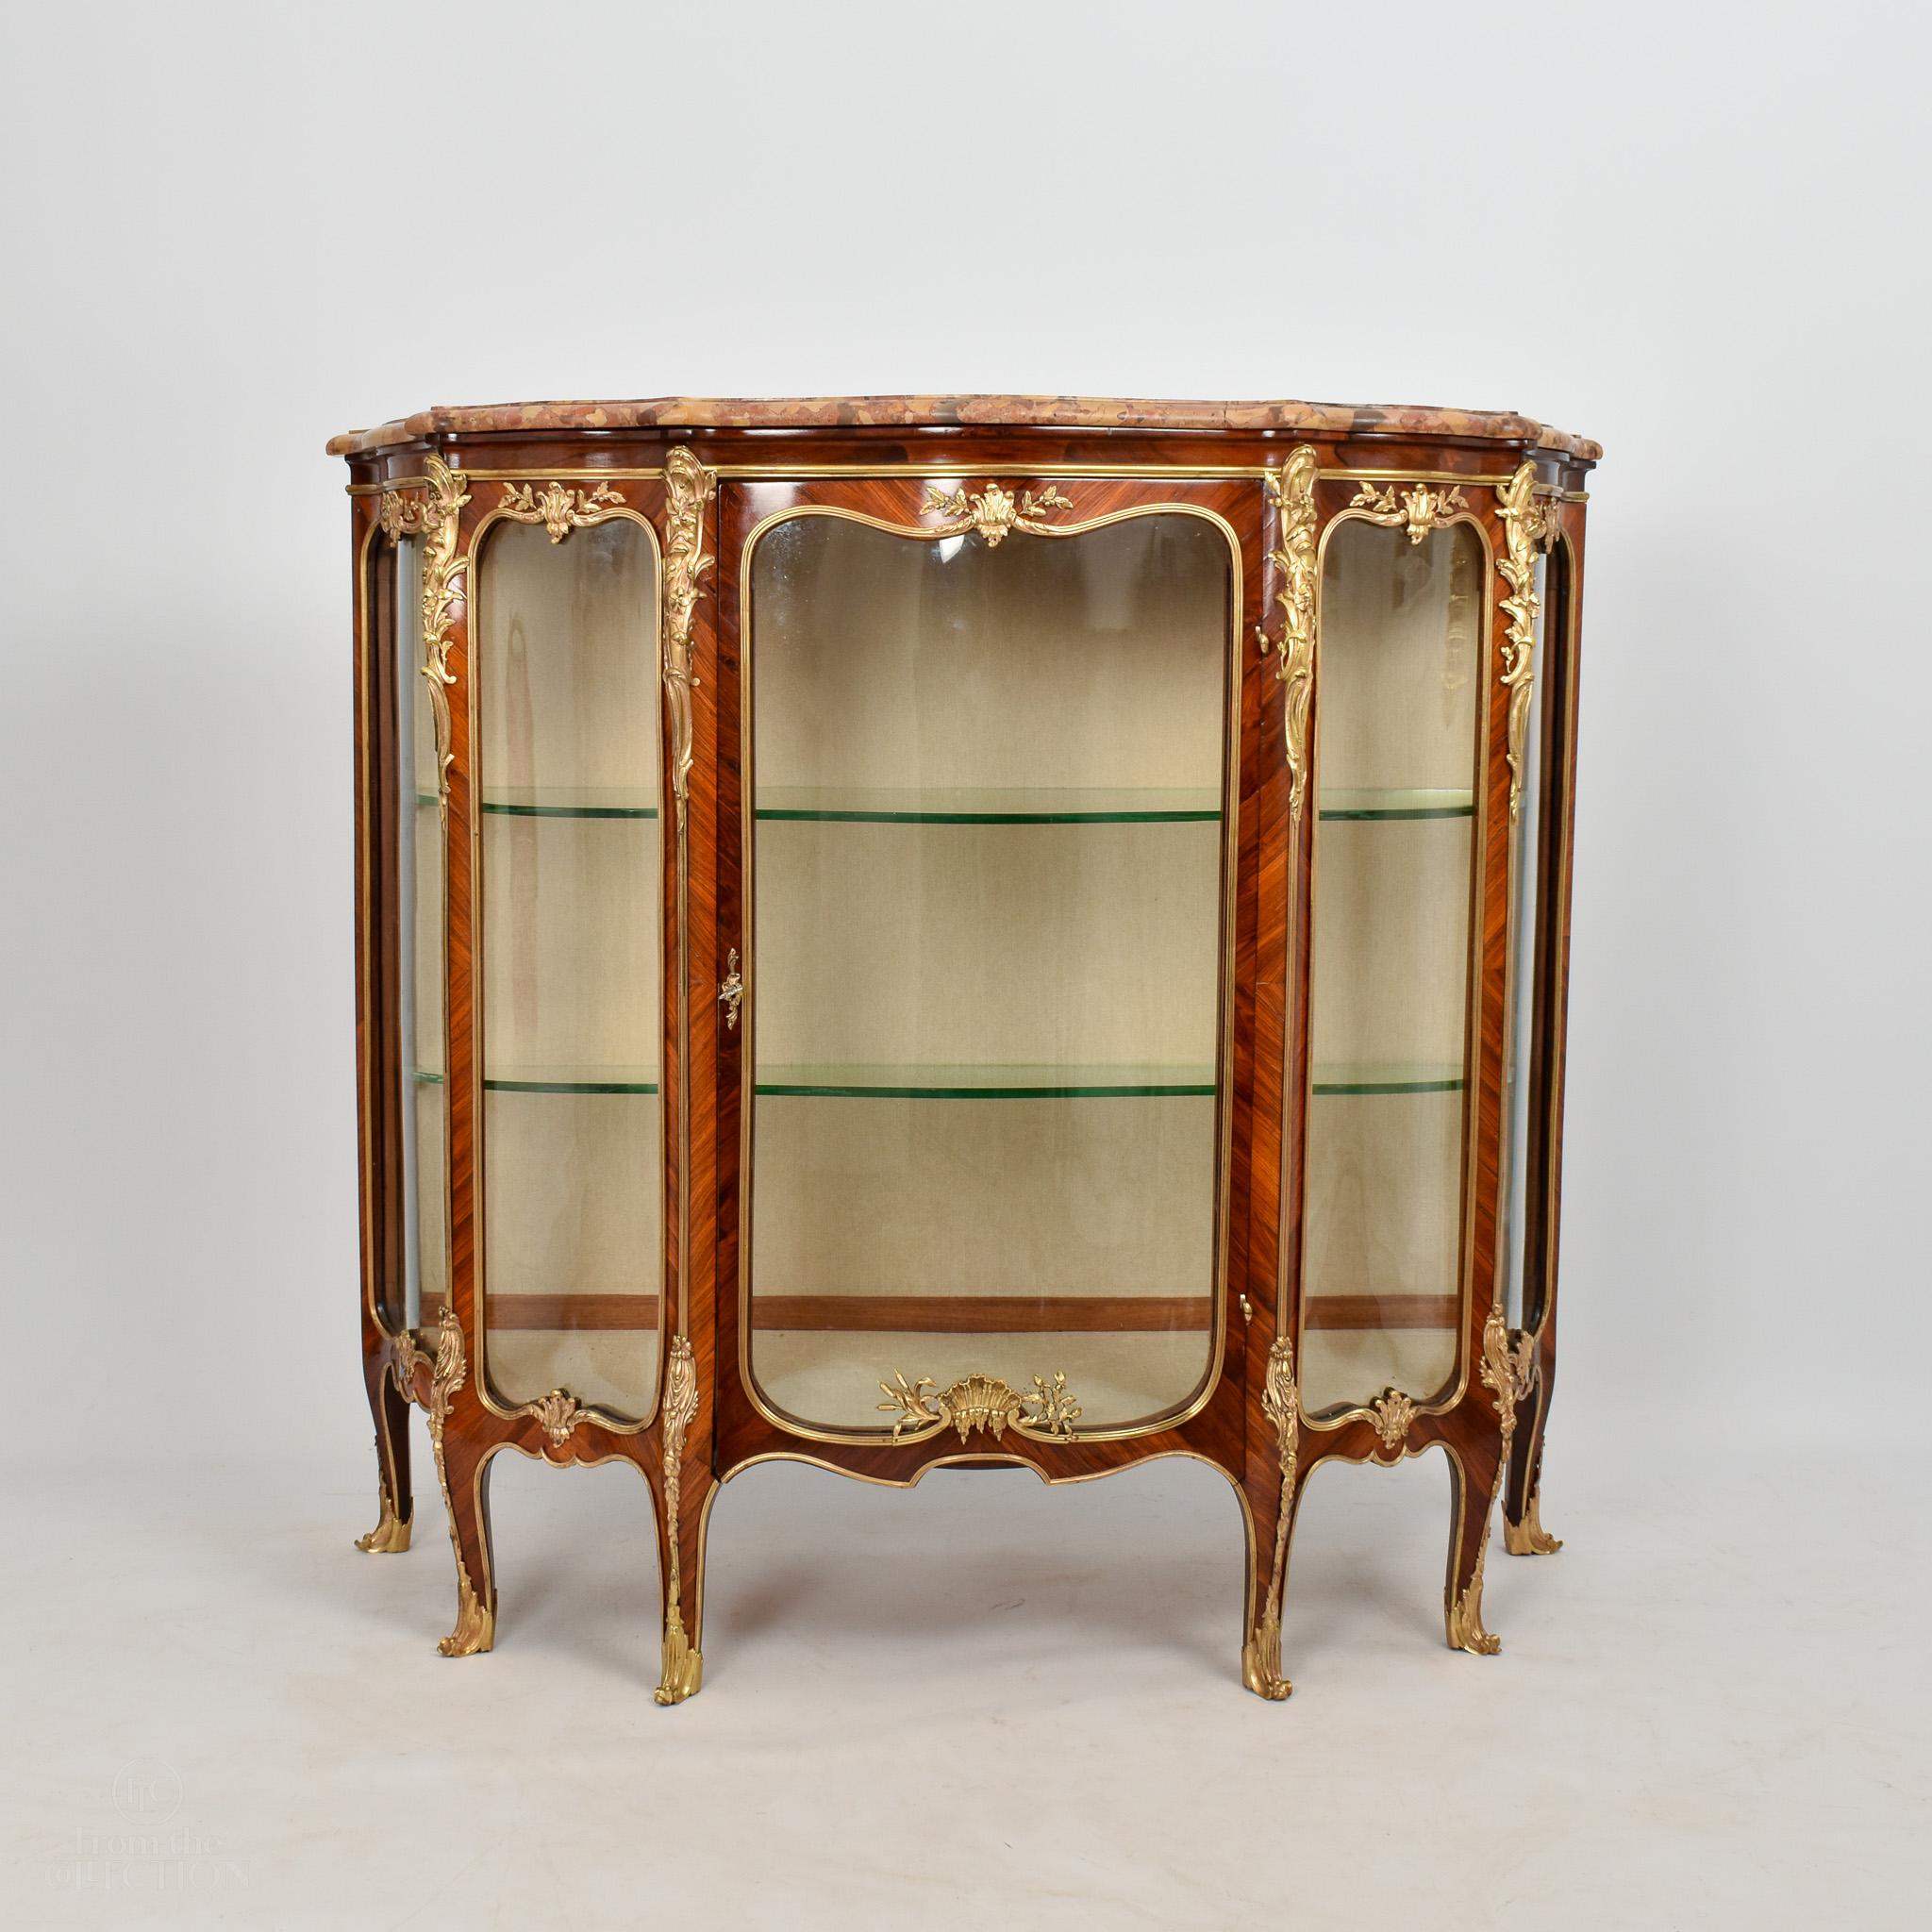 A beautiful French Kingwood Vitrine circa 1890 of exceptional colour and quality with gilt bronze mountings and two shaped glass shelves, glass panels to the side and one door to the front. The piece is of exceptional quality in every aspect, and in